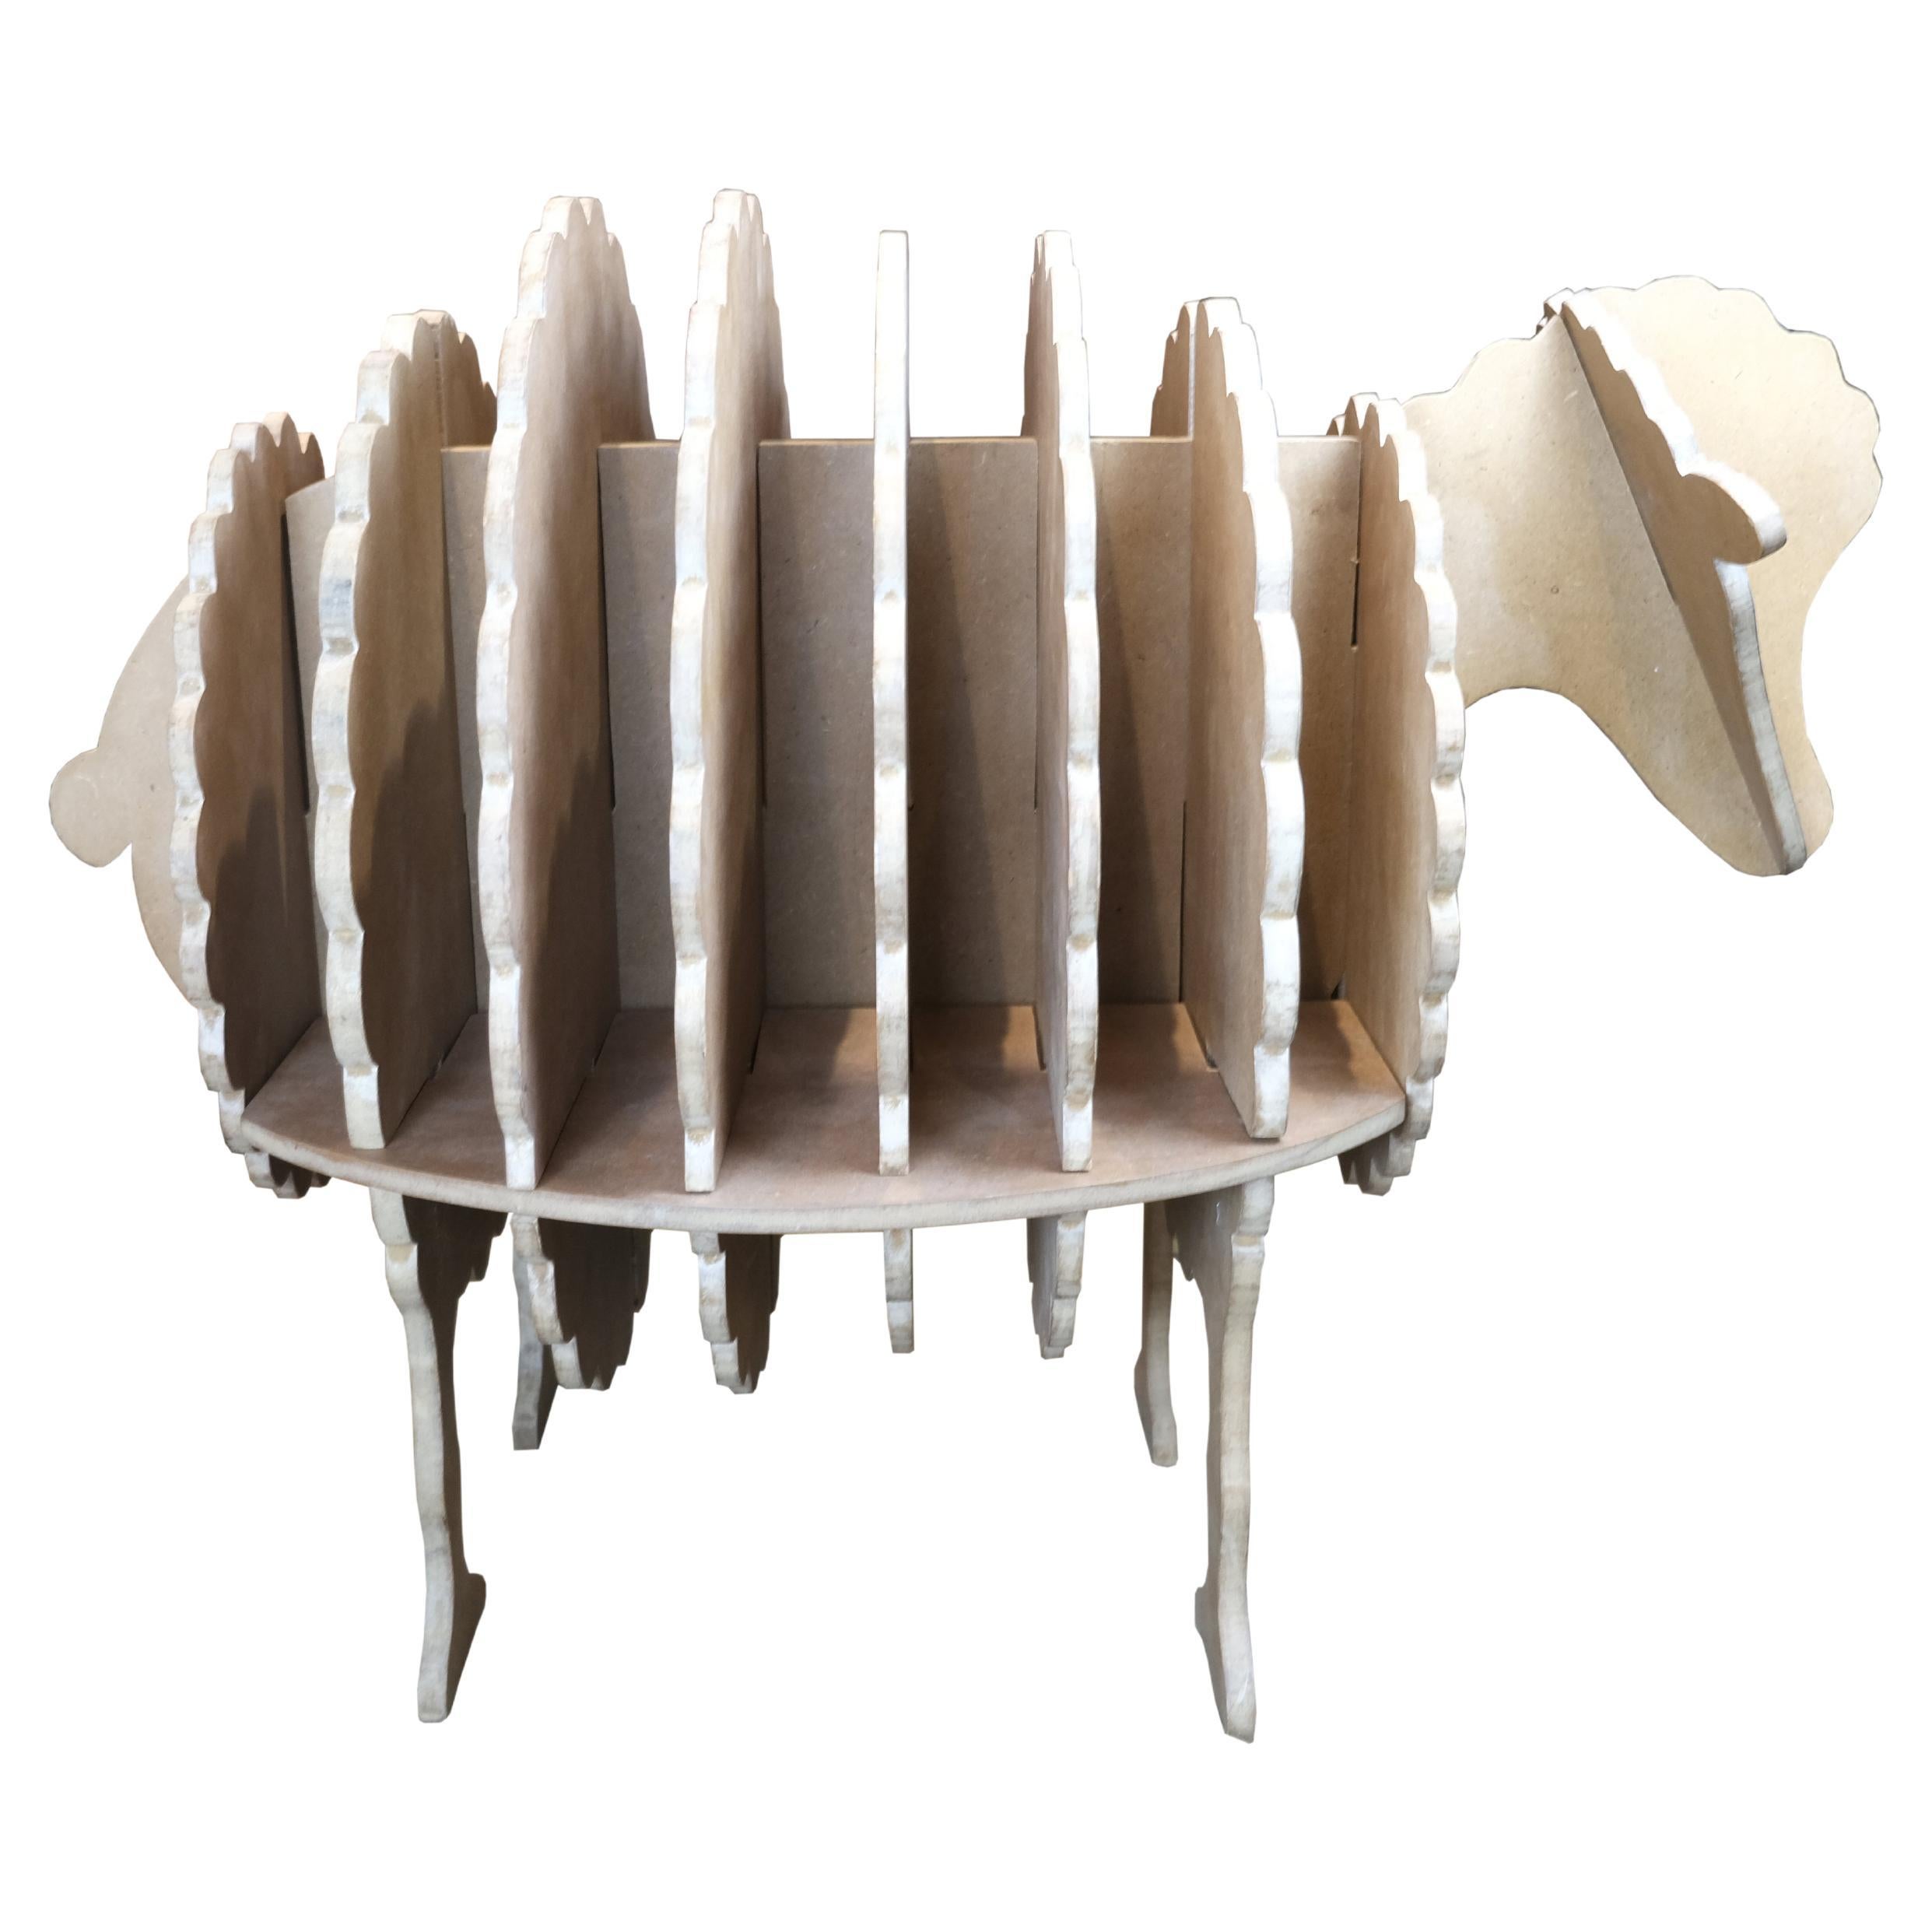 An Italian artisan's fanciful interpretation of a sheep, crafted with interlocking wooden segments that magically capture its woolly essence. An eye-catching accent piece that will liven up any room in the house. Assembling it is also amusing, and